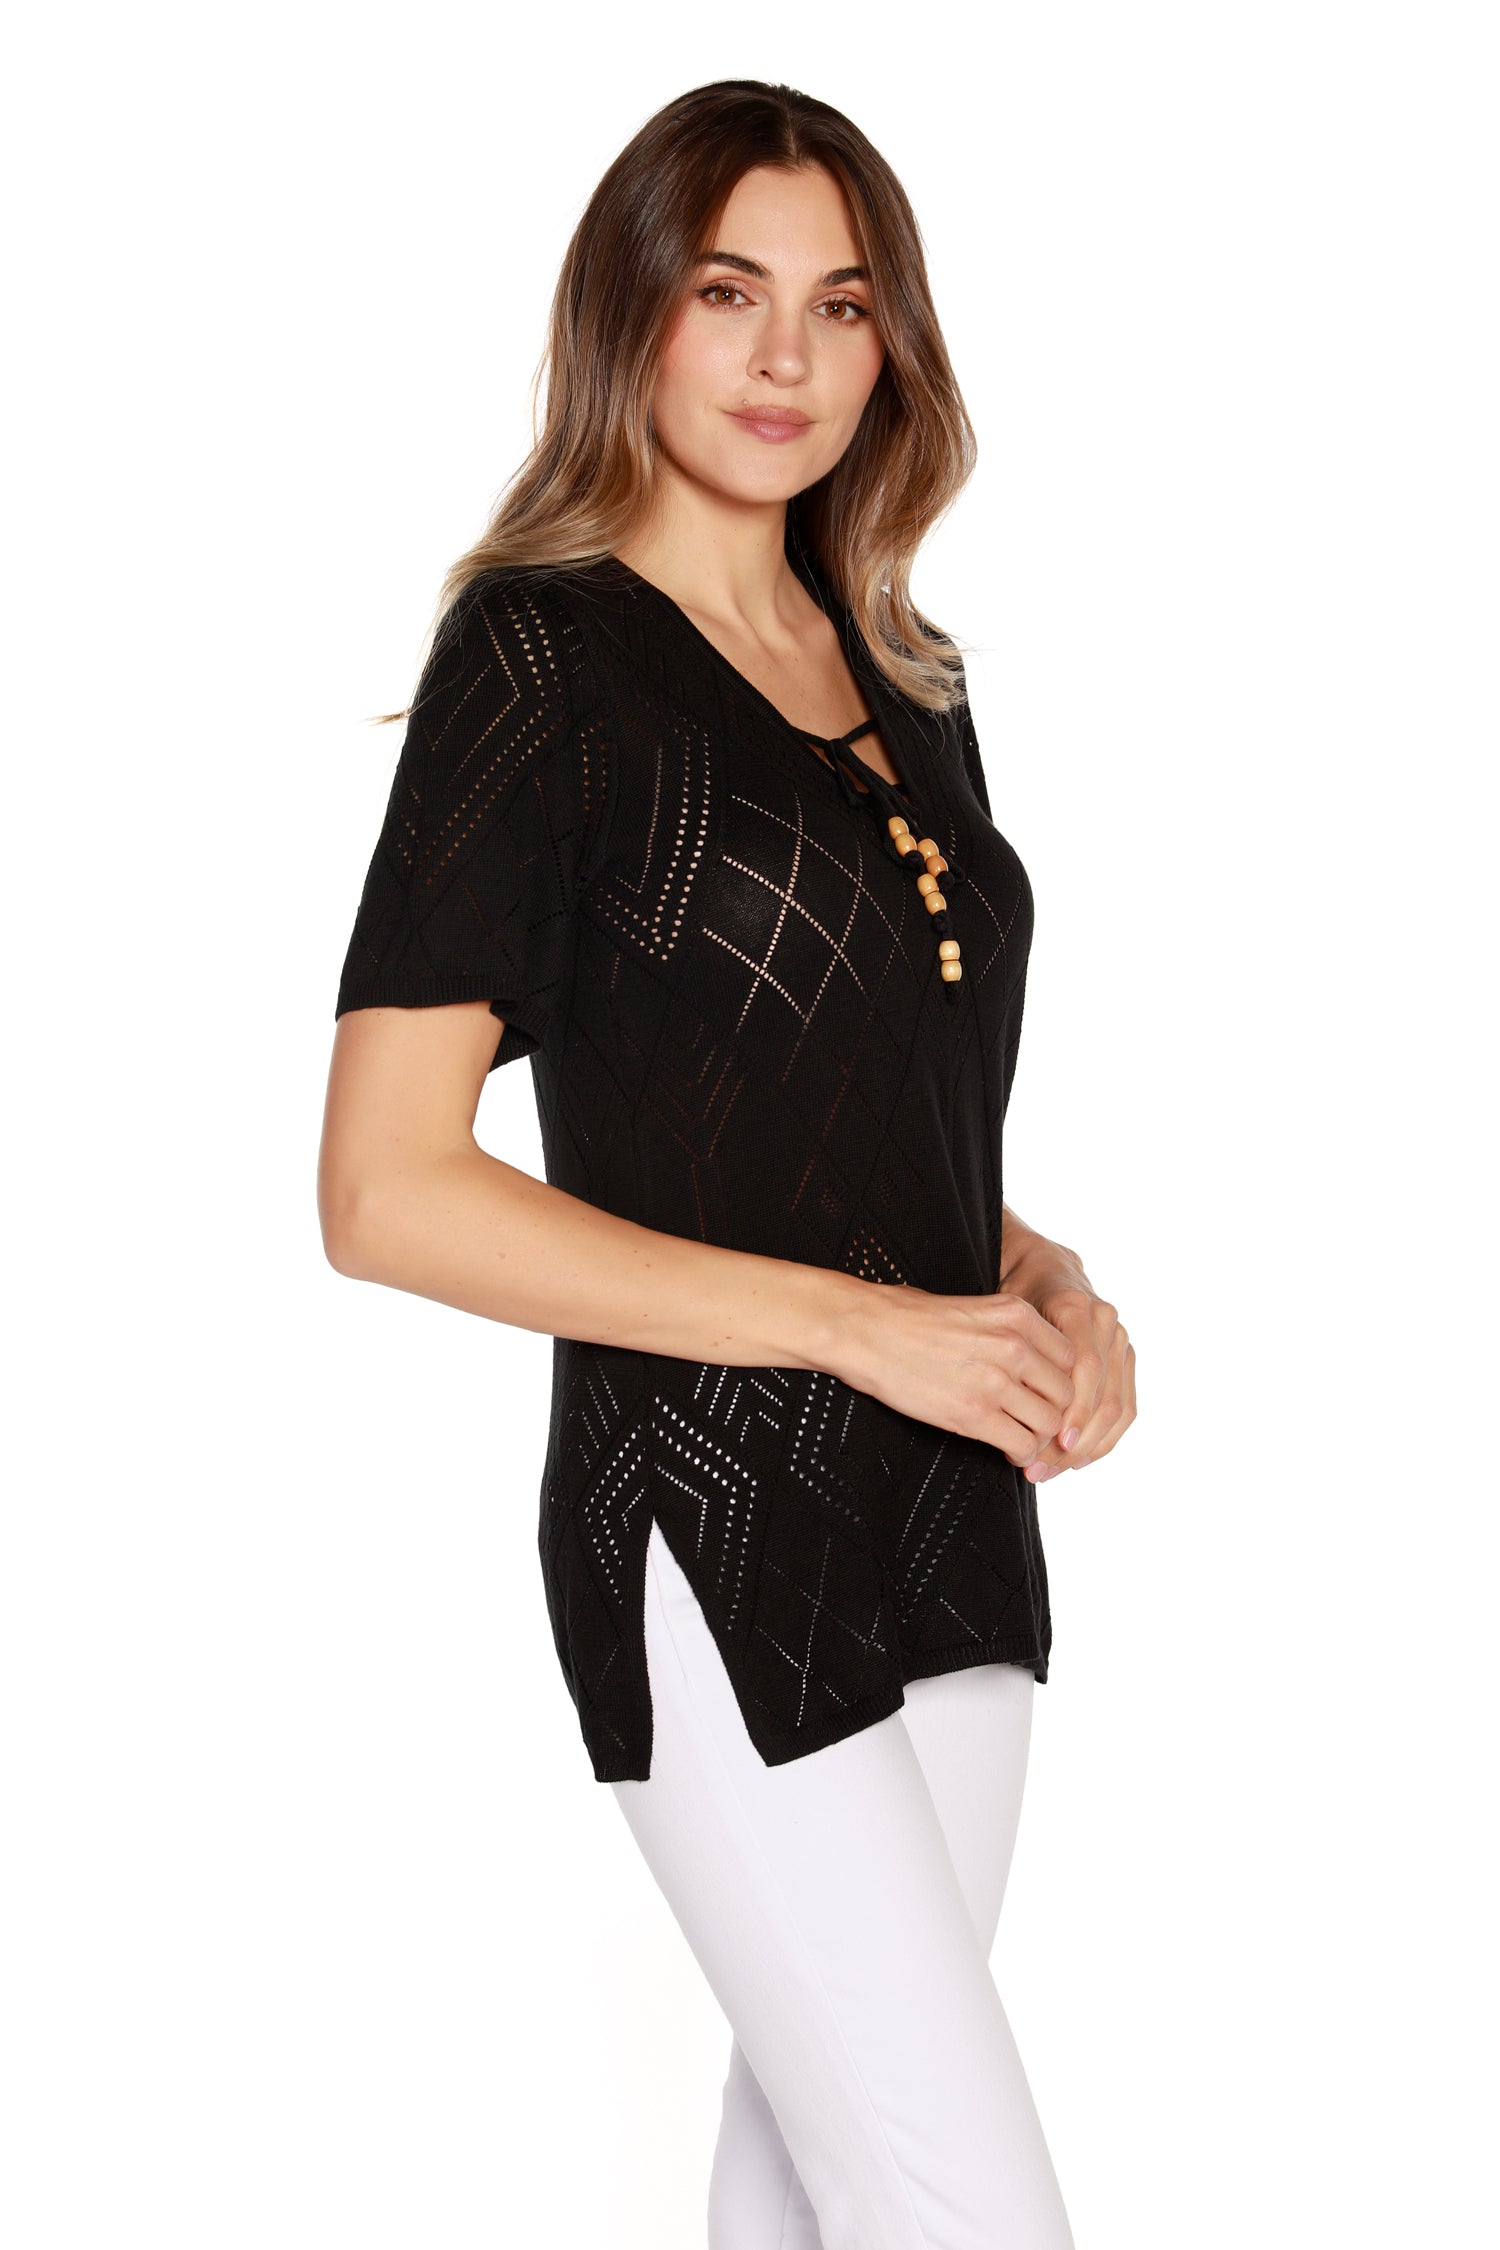 Women's Lightweight Diamond Knit Tunic Pullover Cover Up